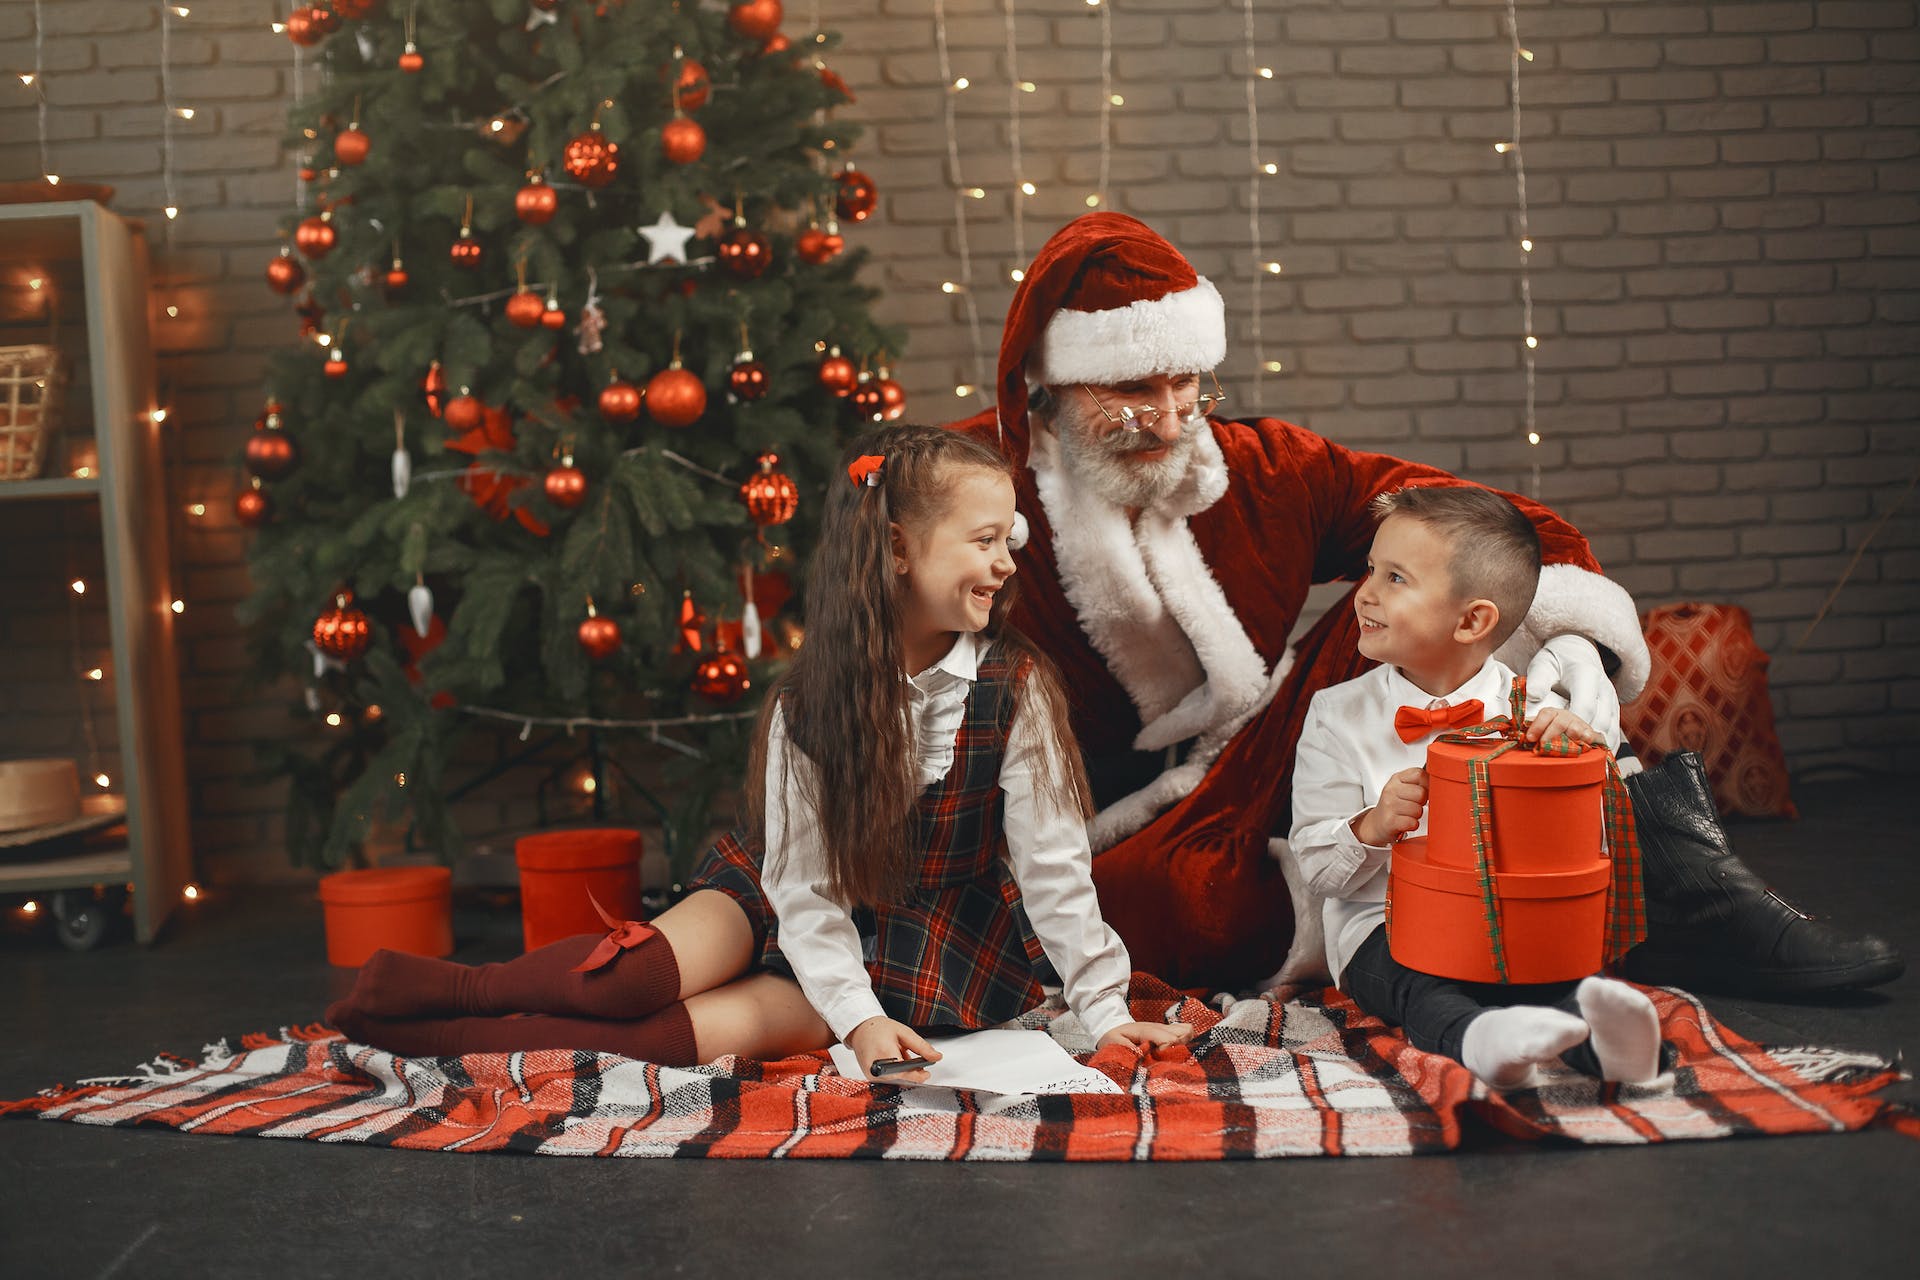 Man in Santa Claus costume sitting with a boy and a girl beside a Christmas tree | Source: Pexels